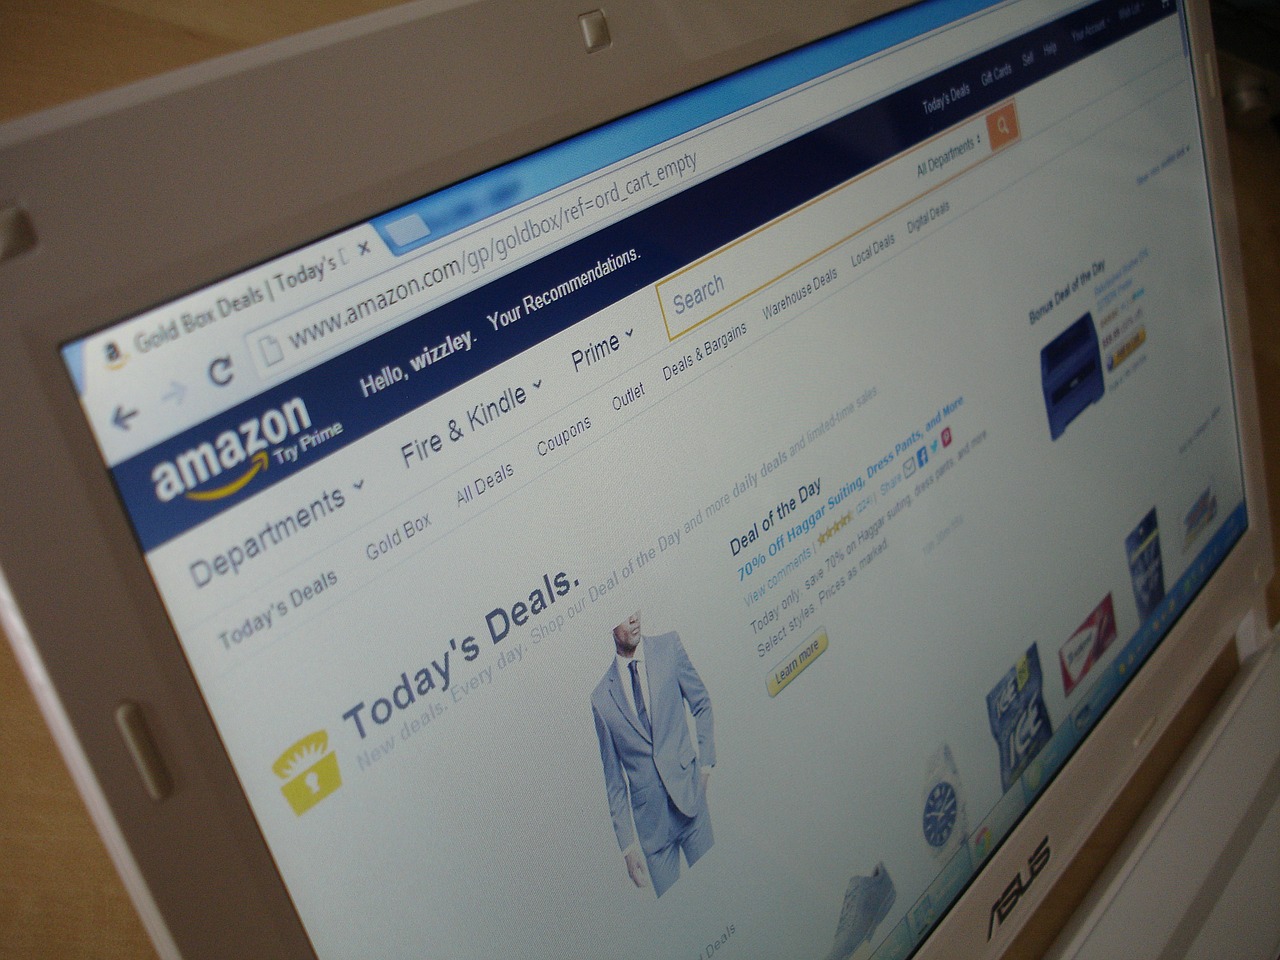 Amazon and Yeti file suit over counterfeit product sales